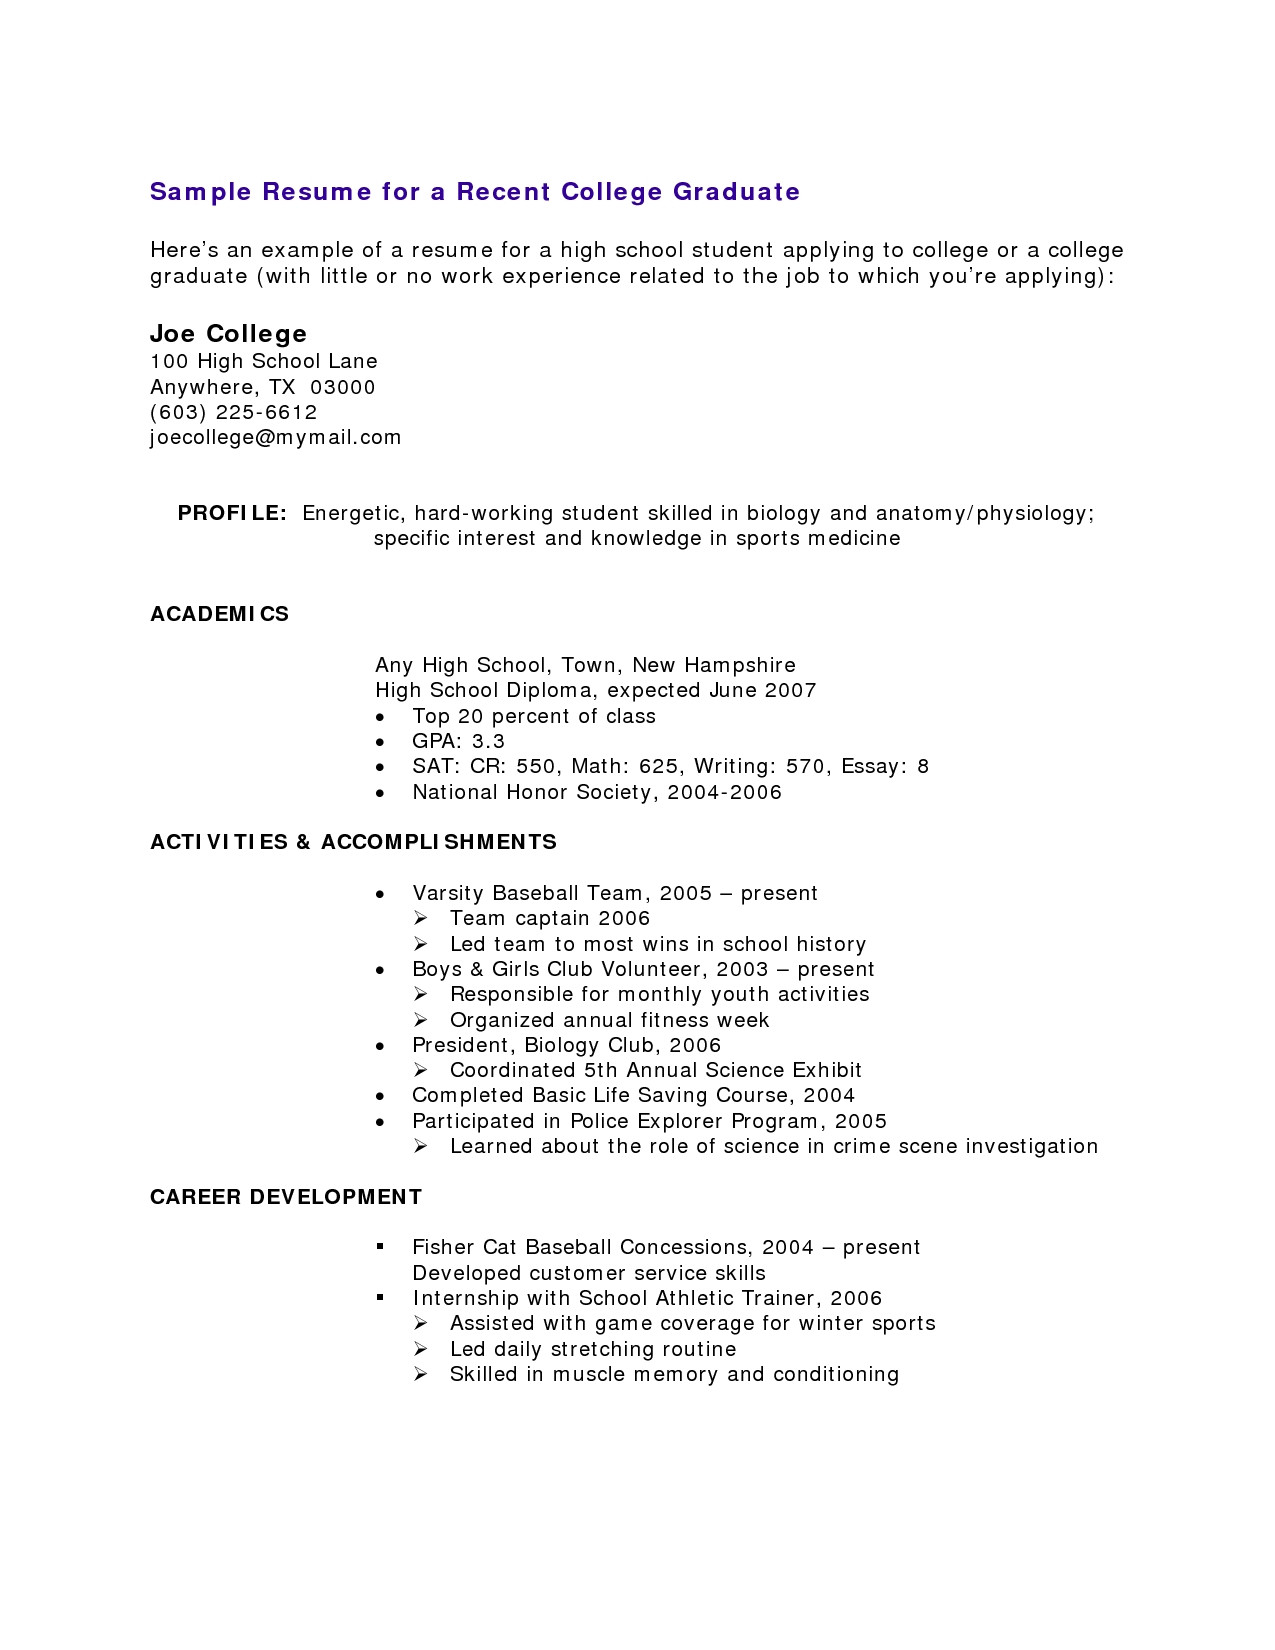 Student Resume with No Work Experience Template How to Make A Resume for Job with No Experience – Easy Resume Sample